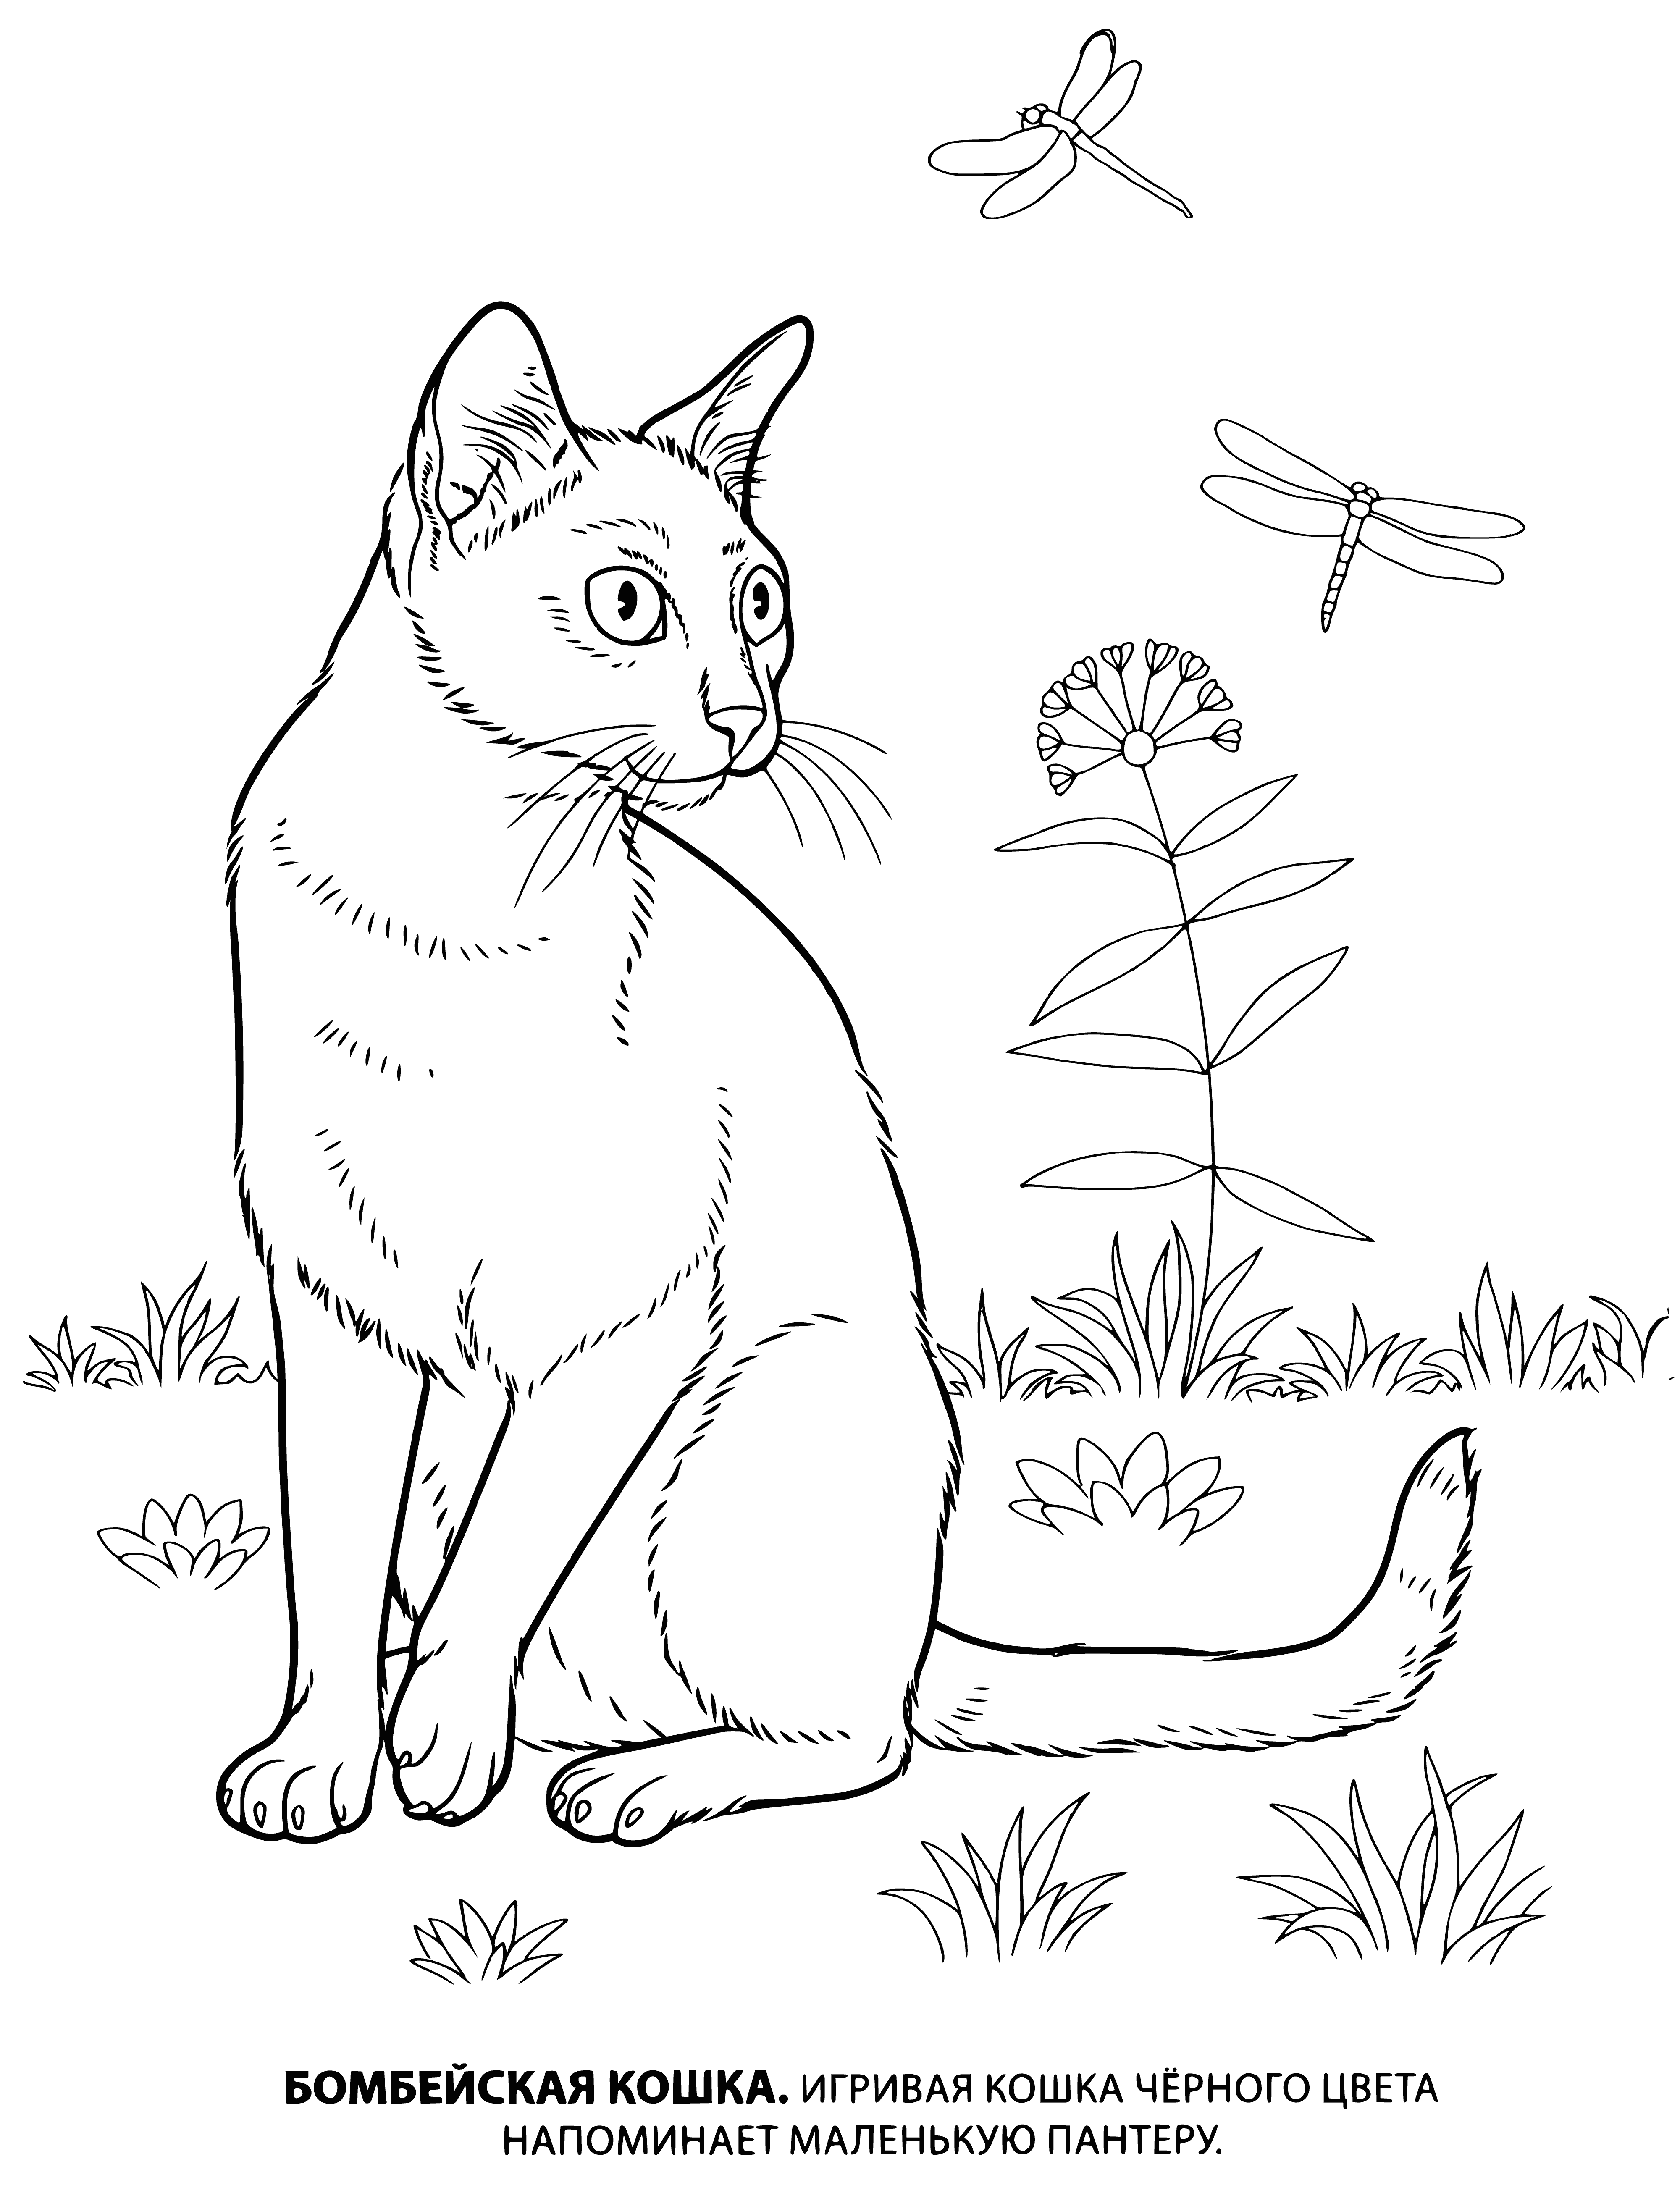 coloring page: The Bombay cat is a medium-sized, muscular cat with a short, glossy black coat, copper-colored eyes, and friendly, affectionate personality.